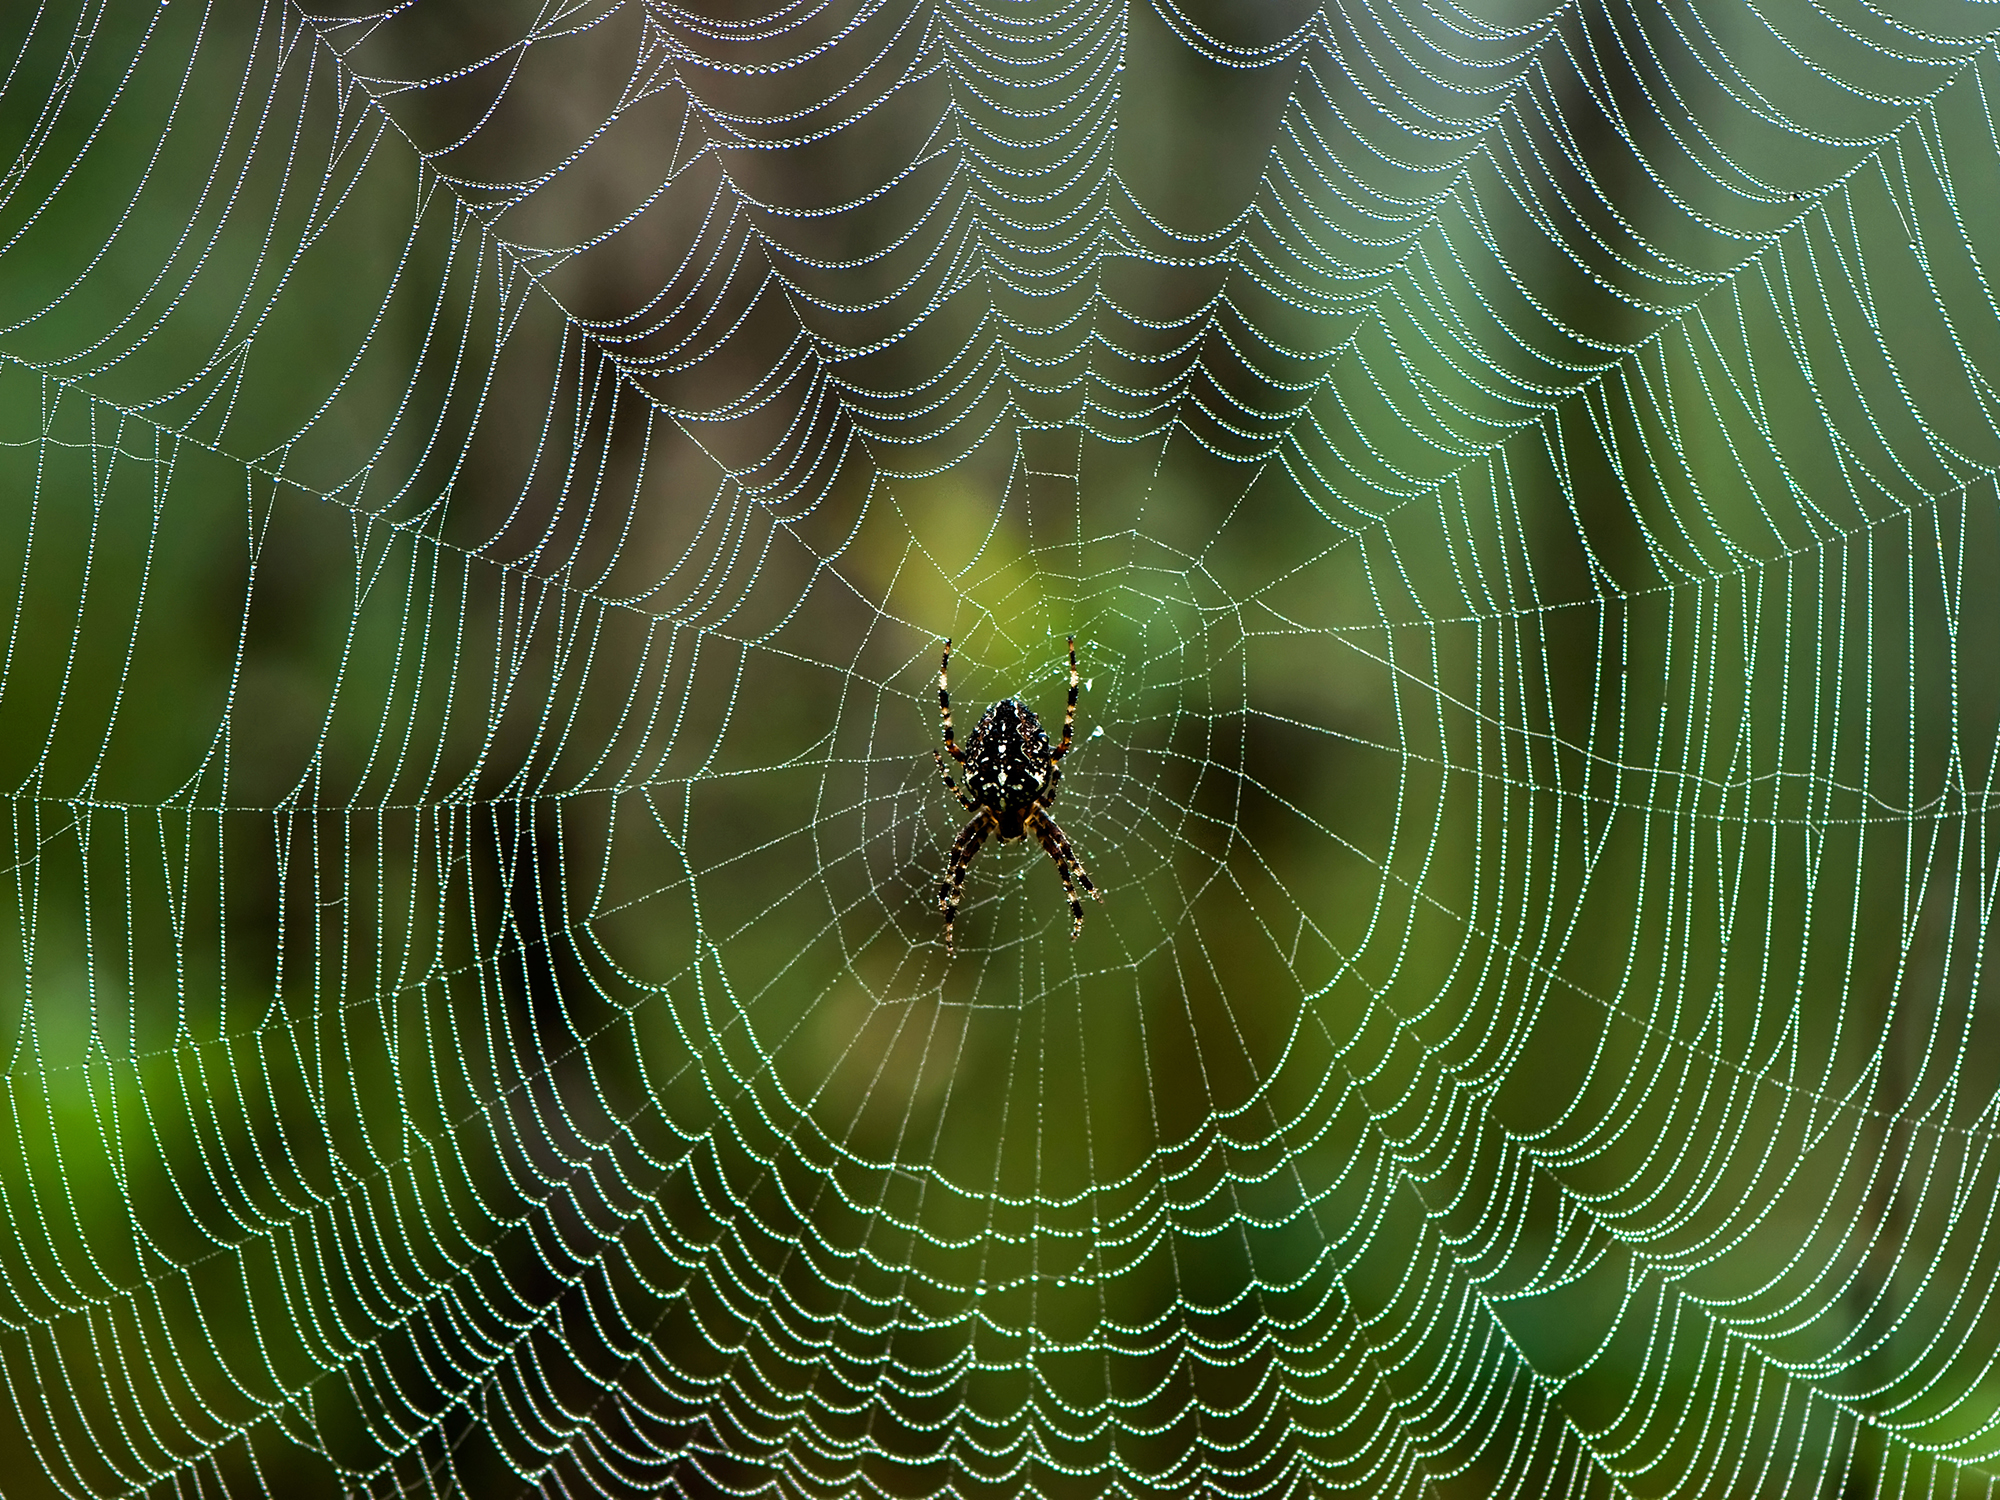 Spider in a web illustrating a story about new possibilities for cancer treatment.